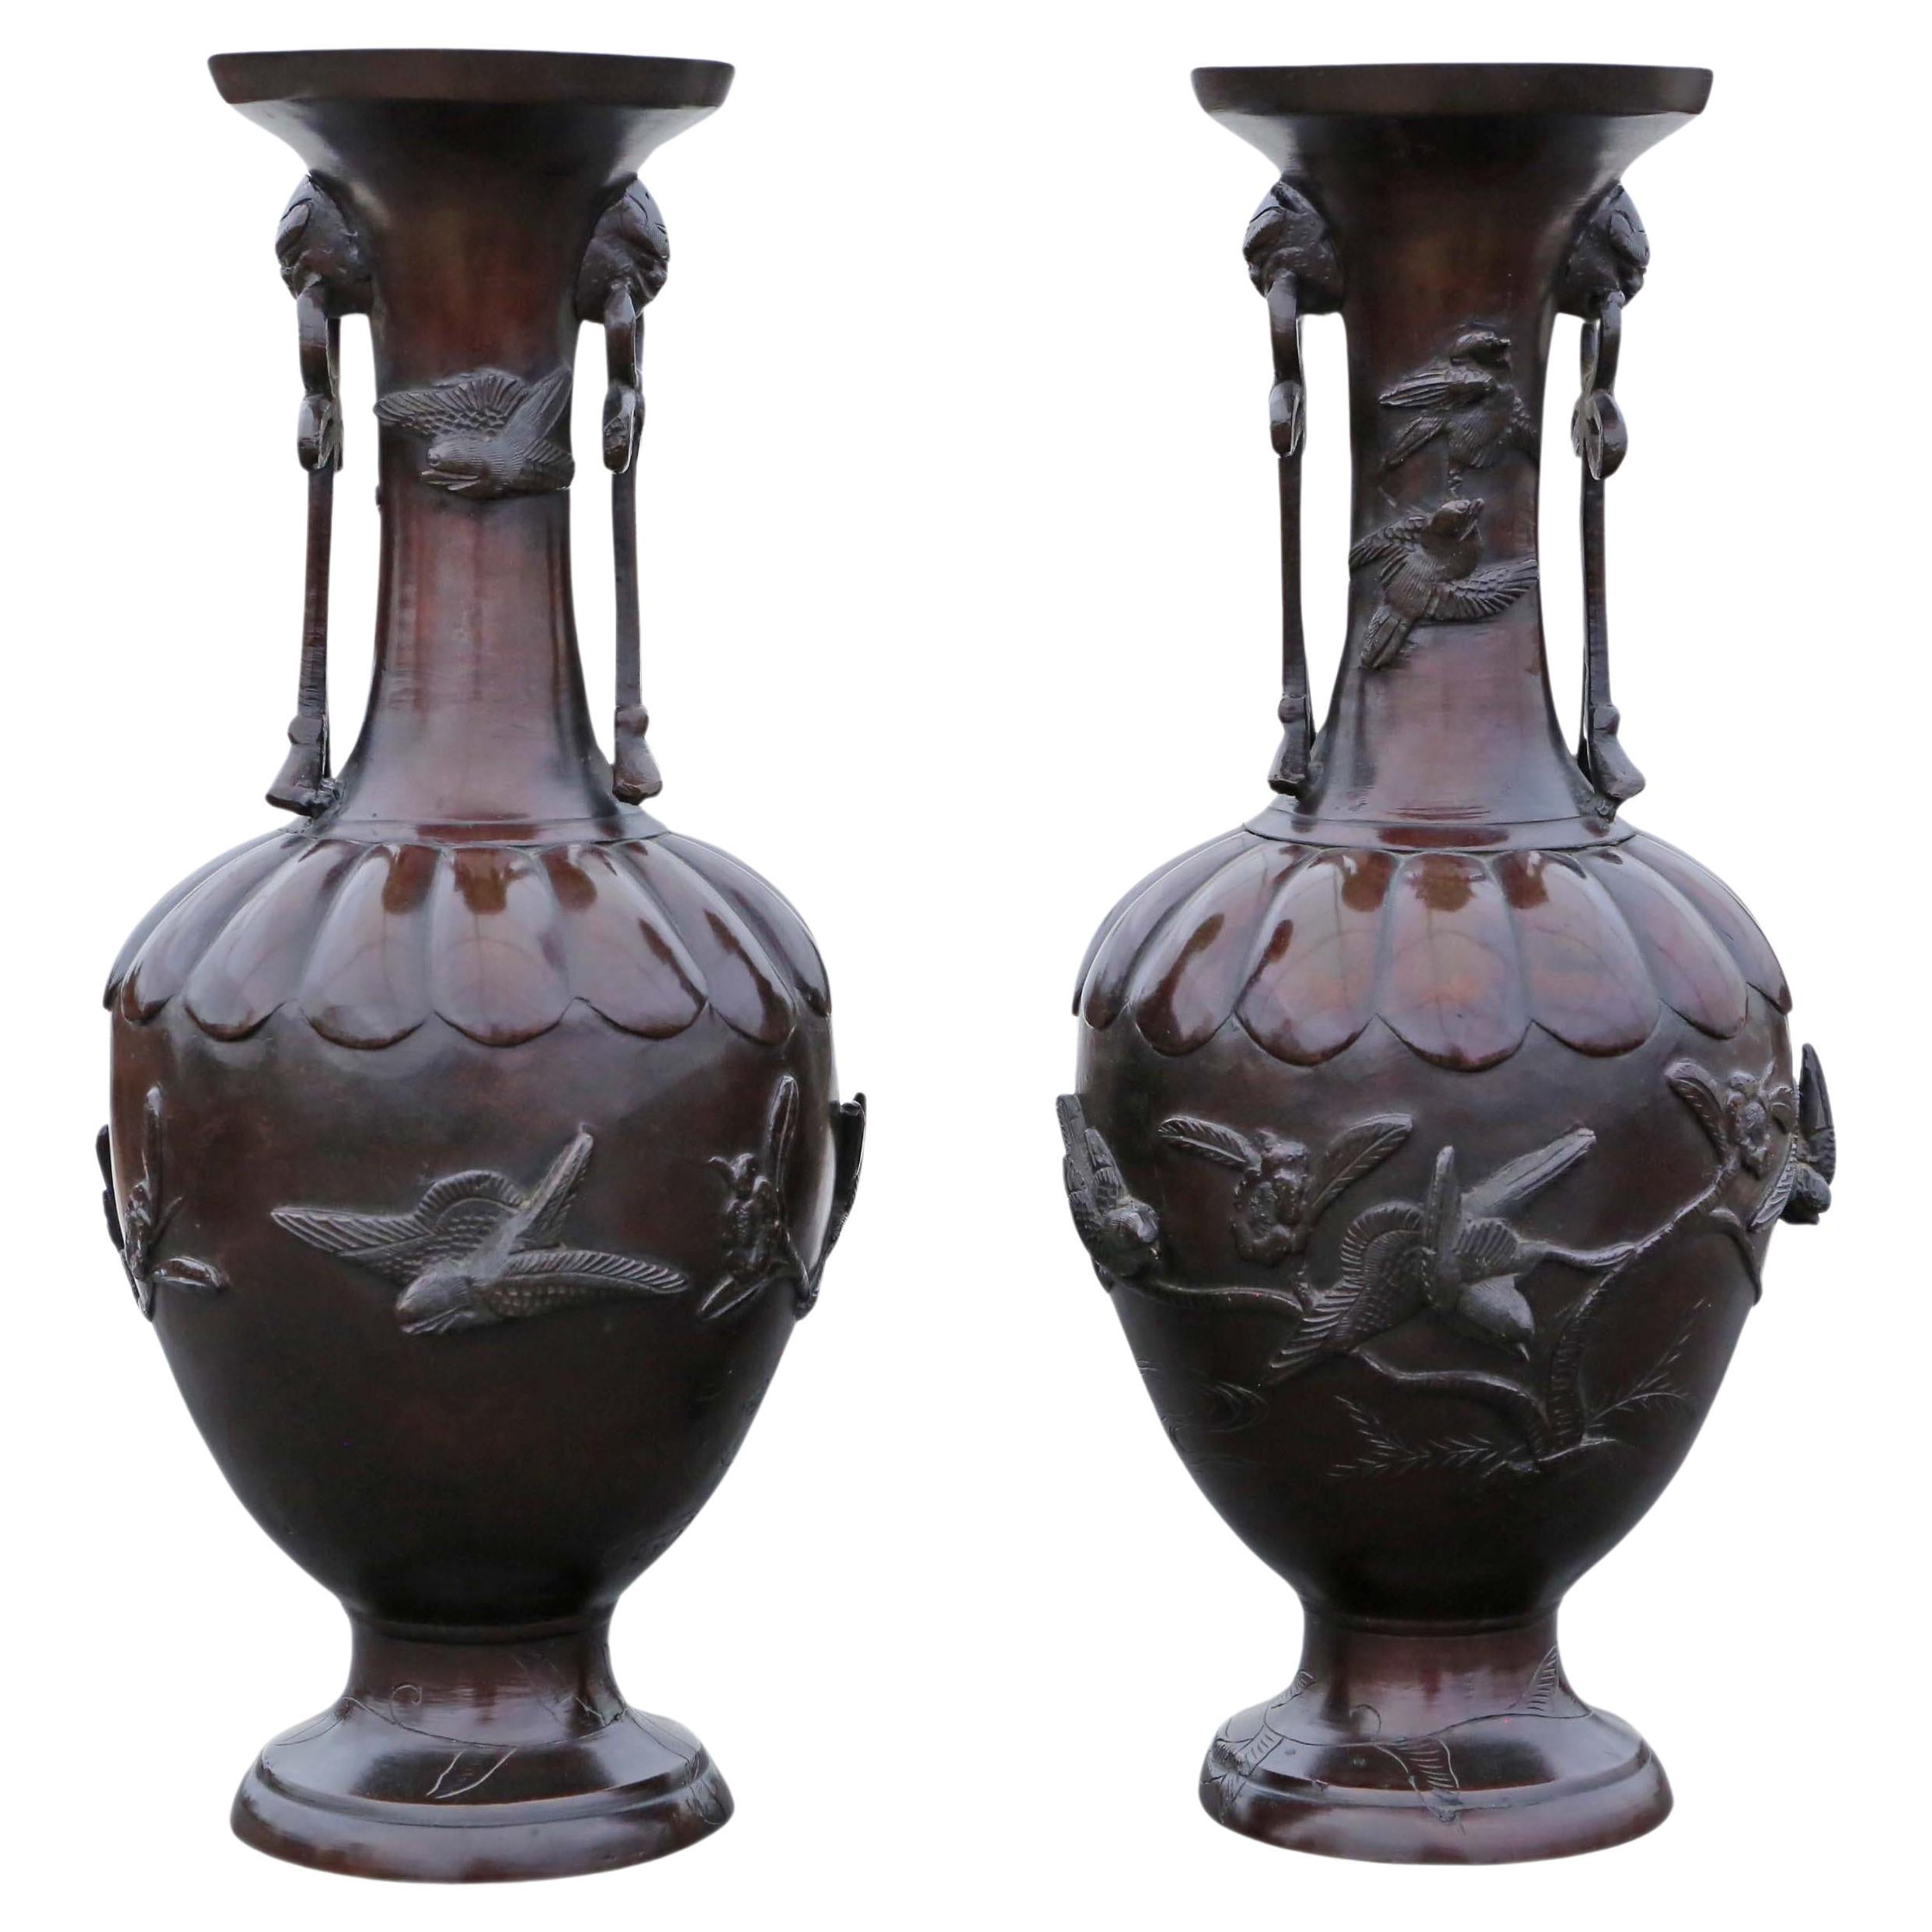 Large Pair of Fine Quality Japanese Bronze Vases Dated 1903 Meiji Period Antique